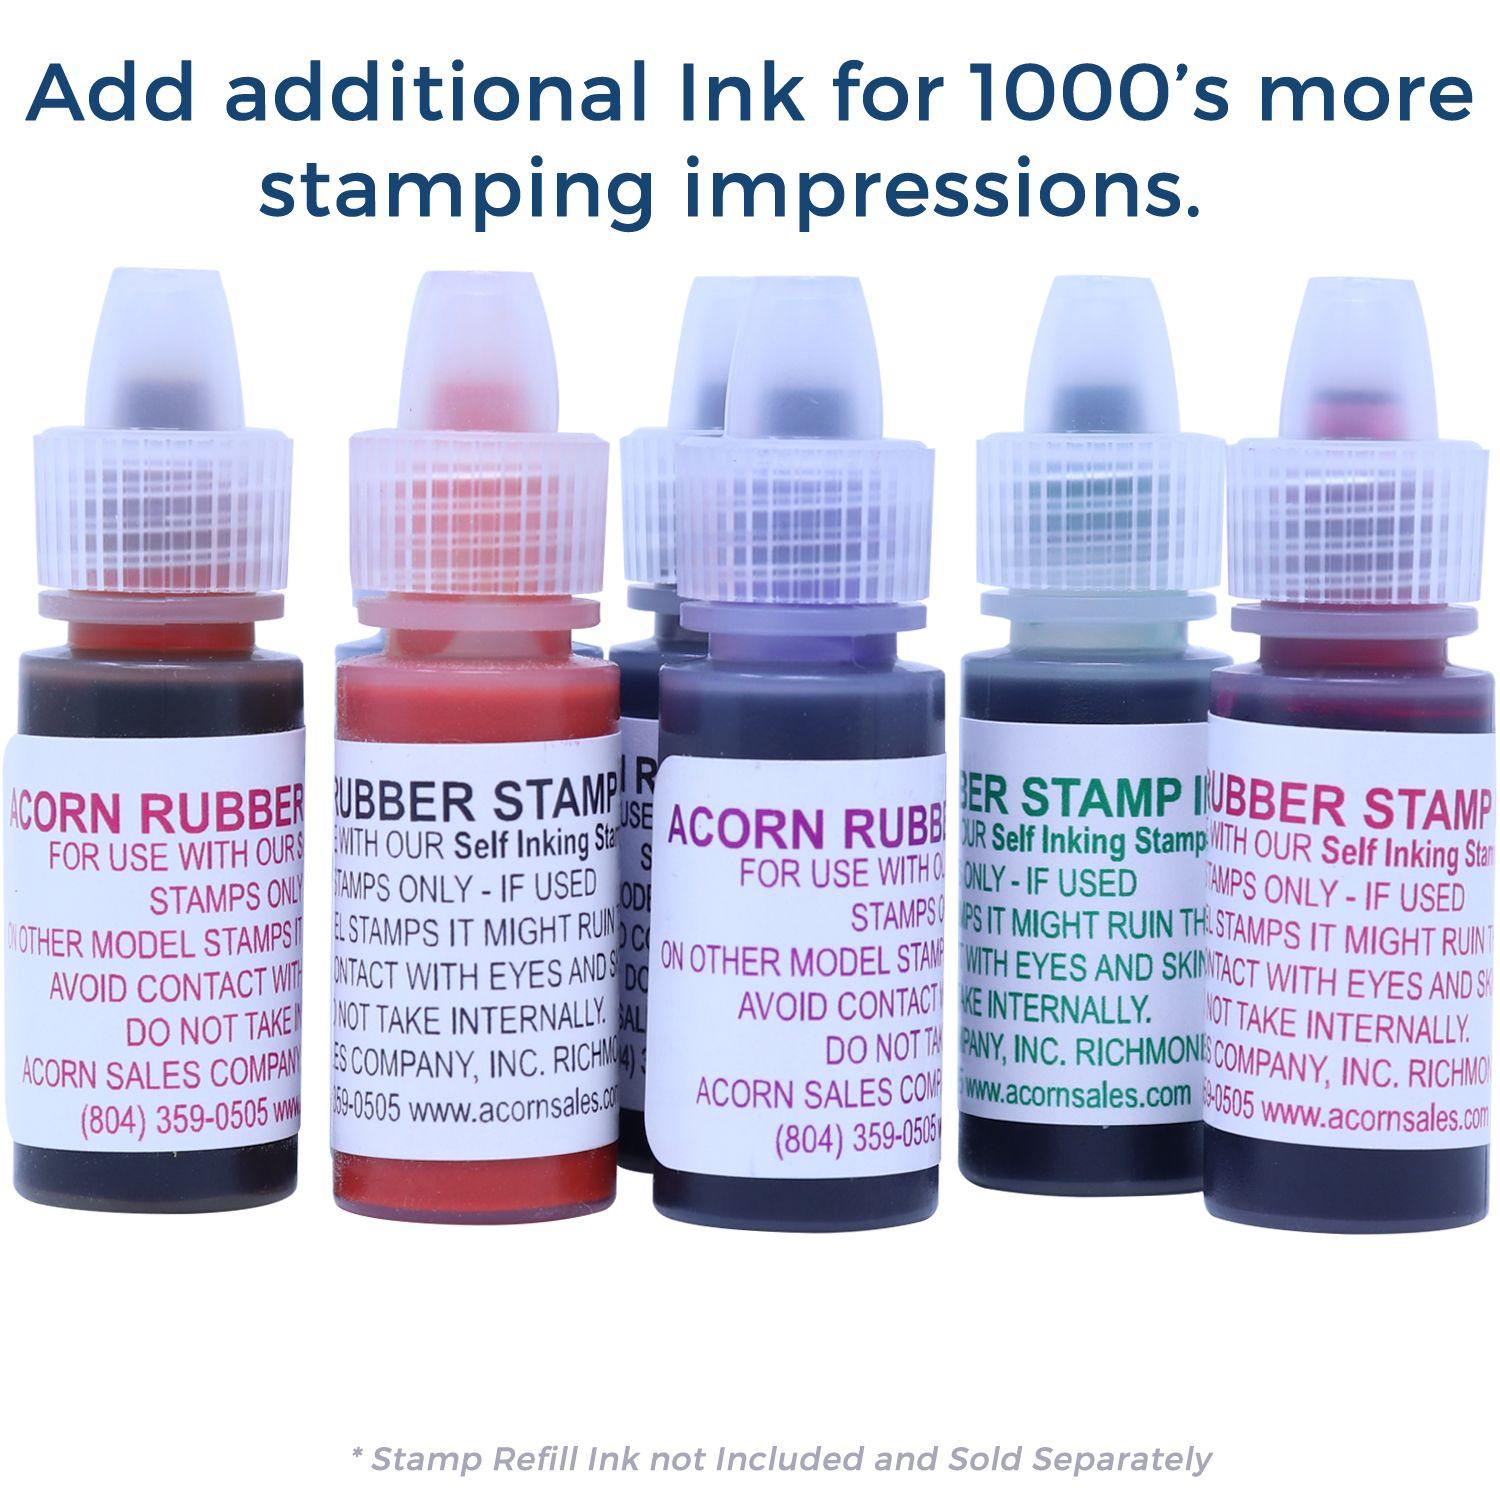 Refill Inks for Slim Pre-Inked Rush with Rabbit Stamp Available